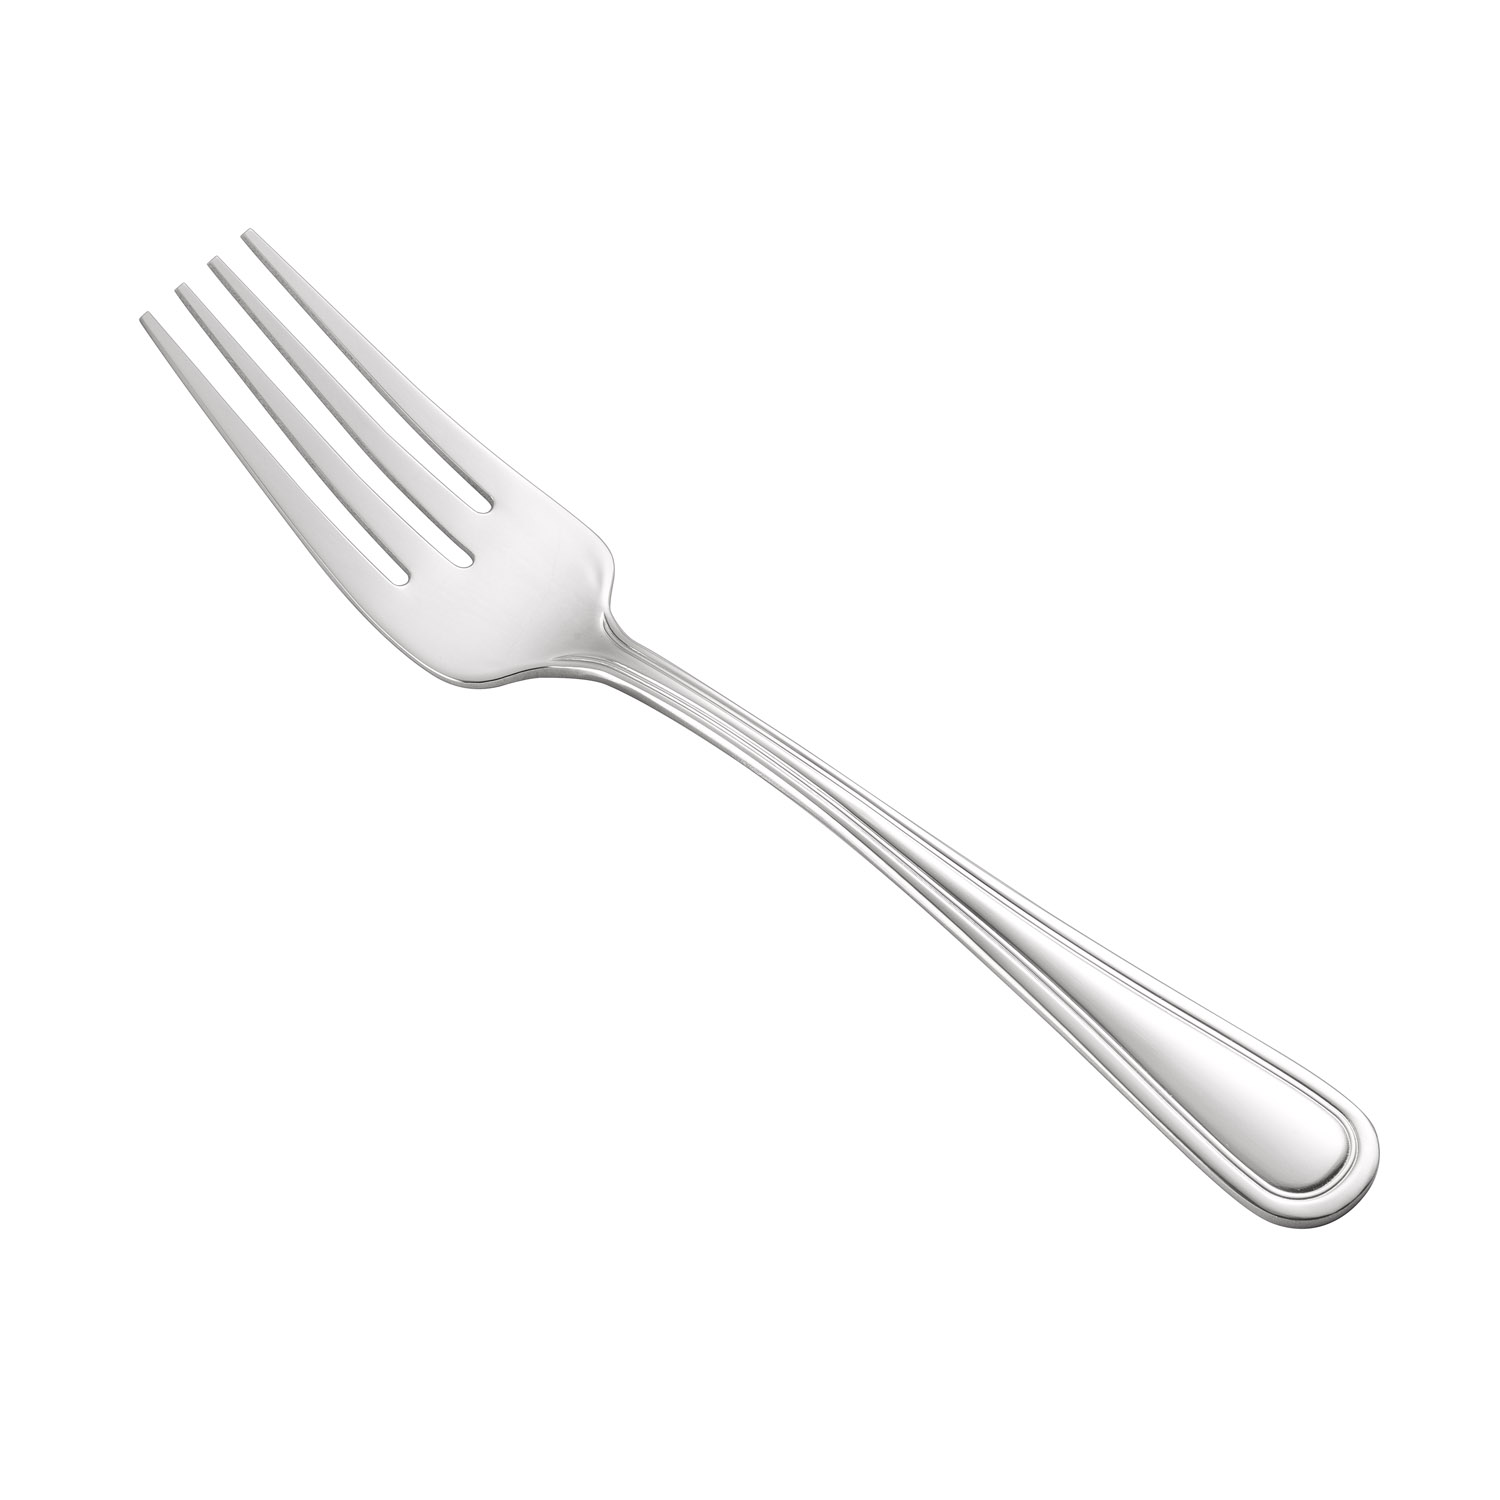 CAC China 8002-18 Elite Fork Cold Meat, Extra Heavyweight 18/8, 8-1/2"